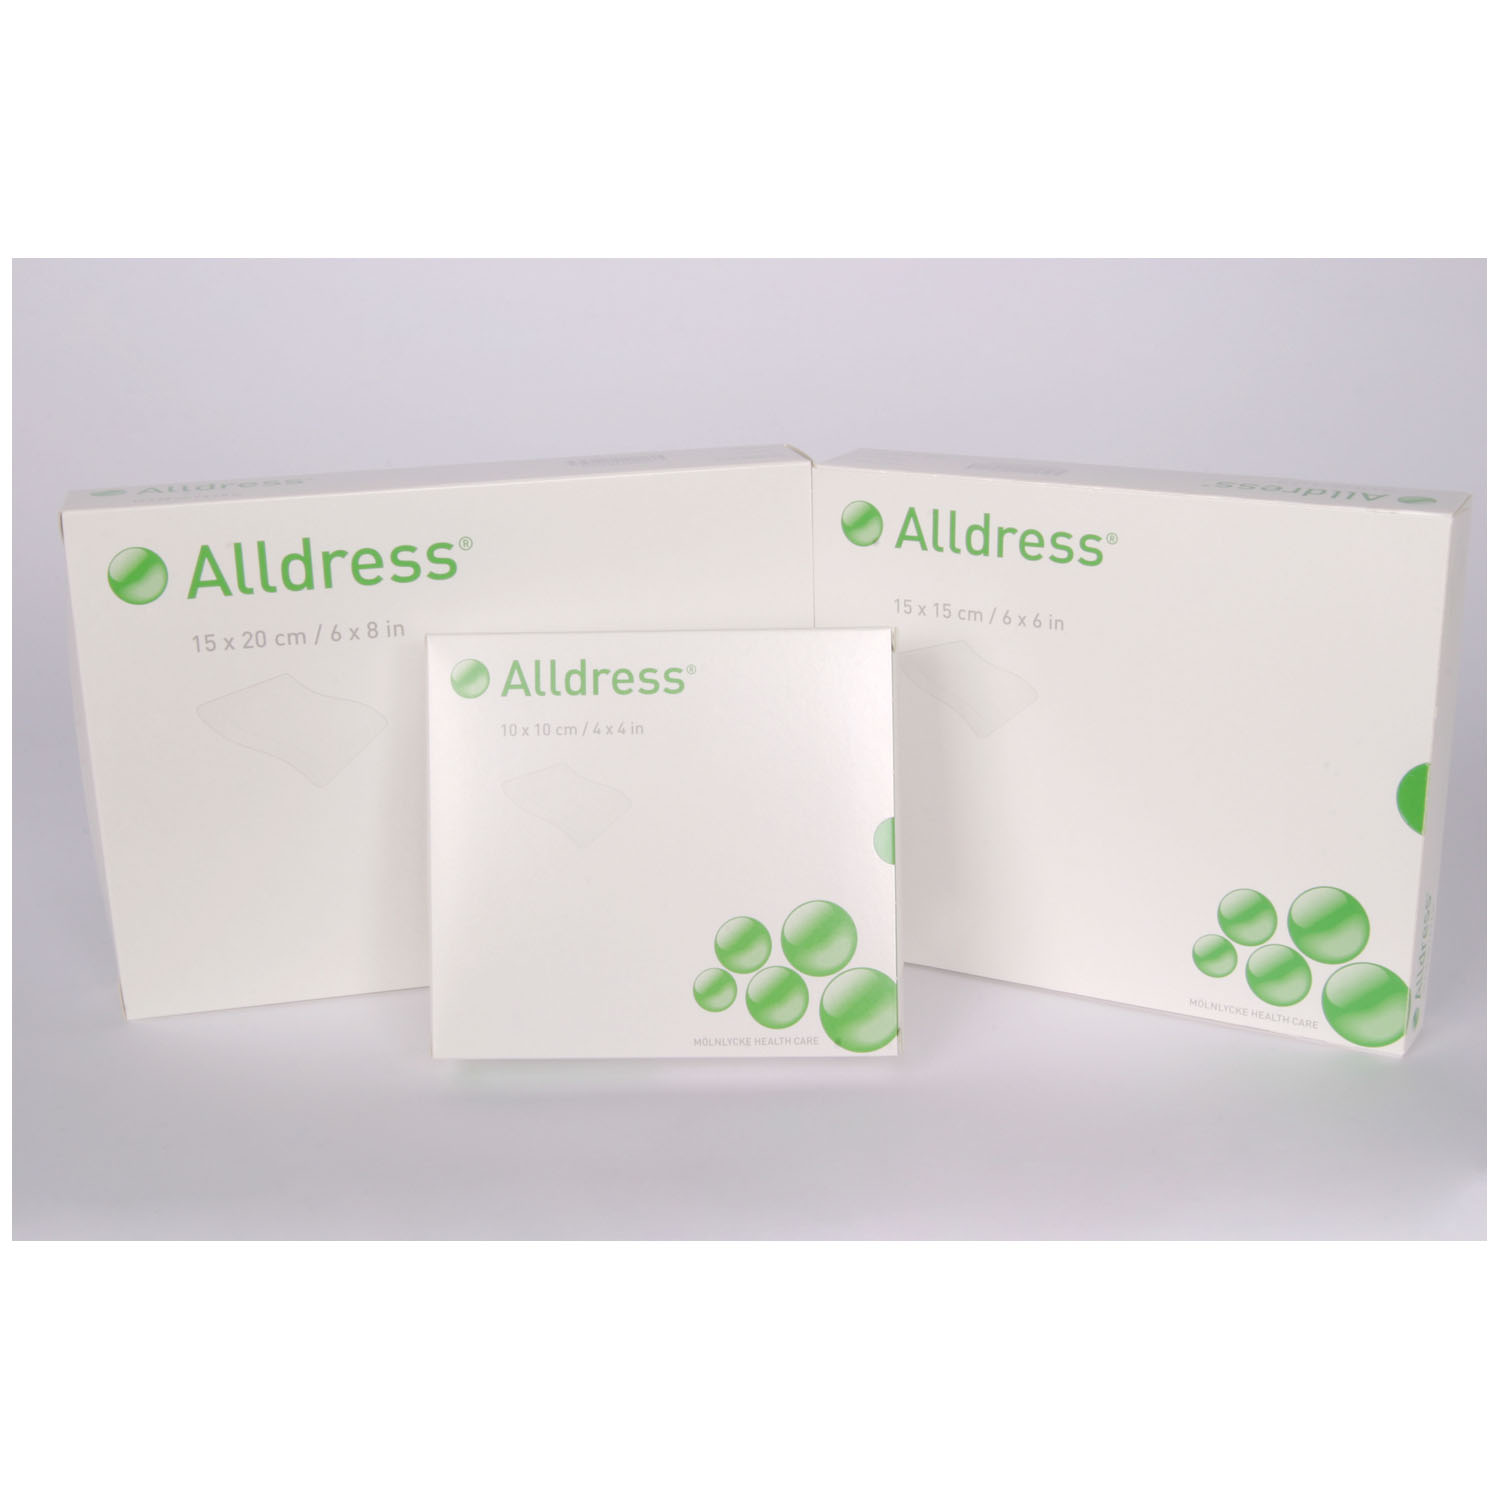 MOLNLYCKE WOUND MANAGEMENT - ALLDRESS : 265369 BX                       $37.85 Stocked